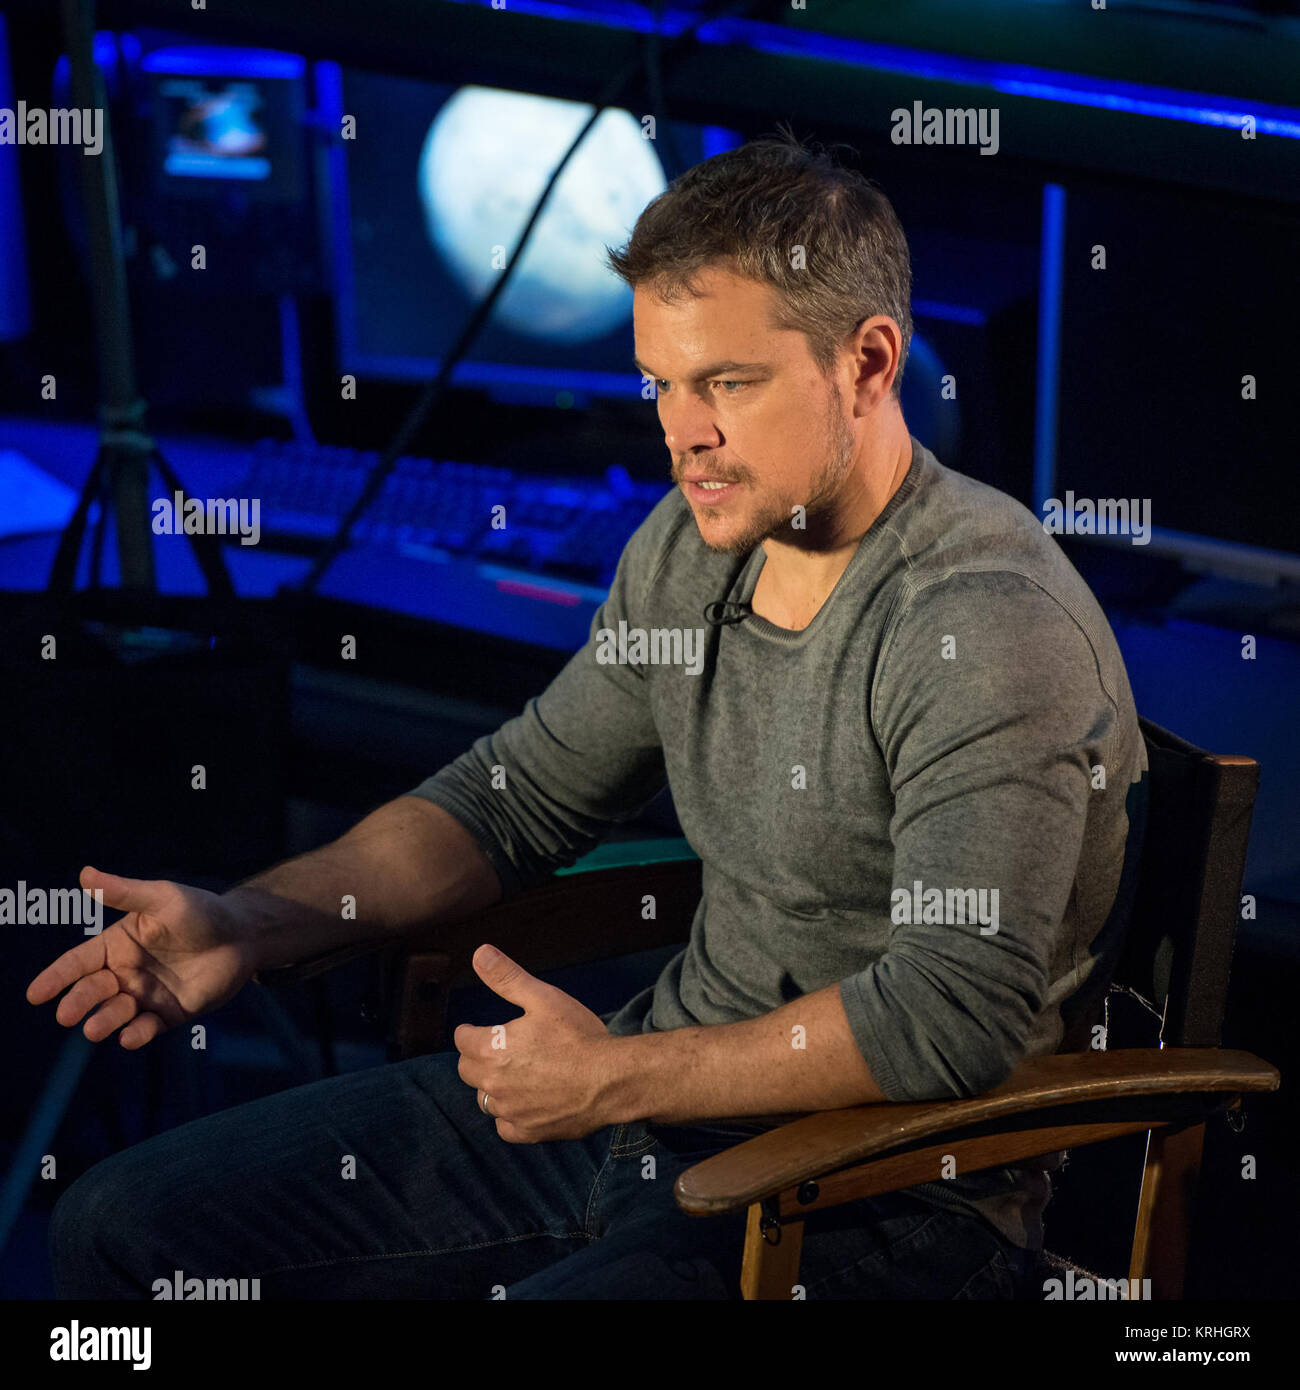 Actor Matt Damon, who stars as NASA Astronaut Mark Watney in the film “The Martian,' participates in media interviews, Tuesday, Aug. 18, 2015, at the Jet Propulsion Laboratory in Pasadena, California. NASA scientists and engineers served as technical consultants on the film. The movie portrays a realistic view of the climate and topography of Mars, based on NASA data, and some of the challenges NASA faces as we prepare for human exploration of the Red Planet in the 2030s. Photo Credit: (NASA/Bill Ingalls) NASA Journey to Mars and E2809CThe Martian22 (201508180038HQ) Stock Photo